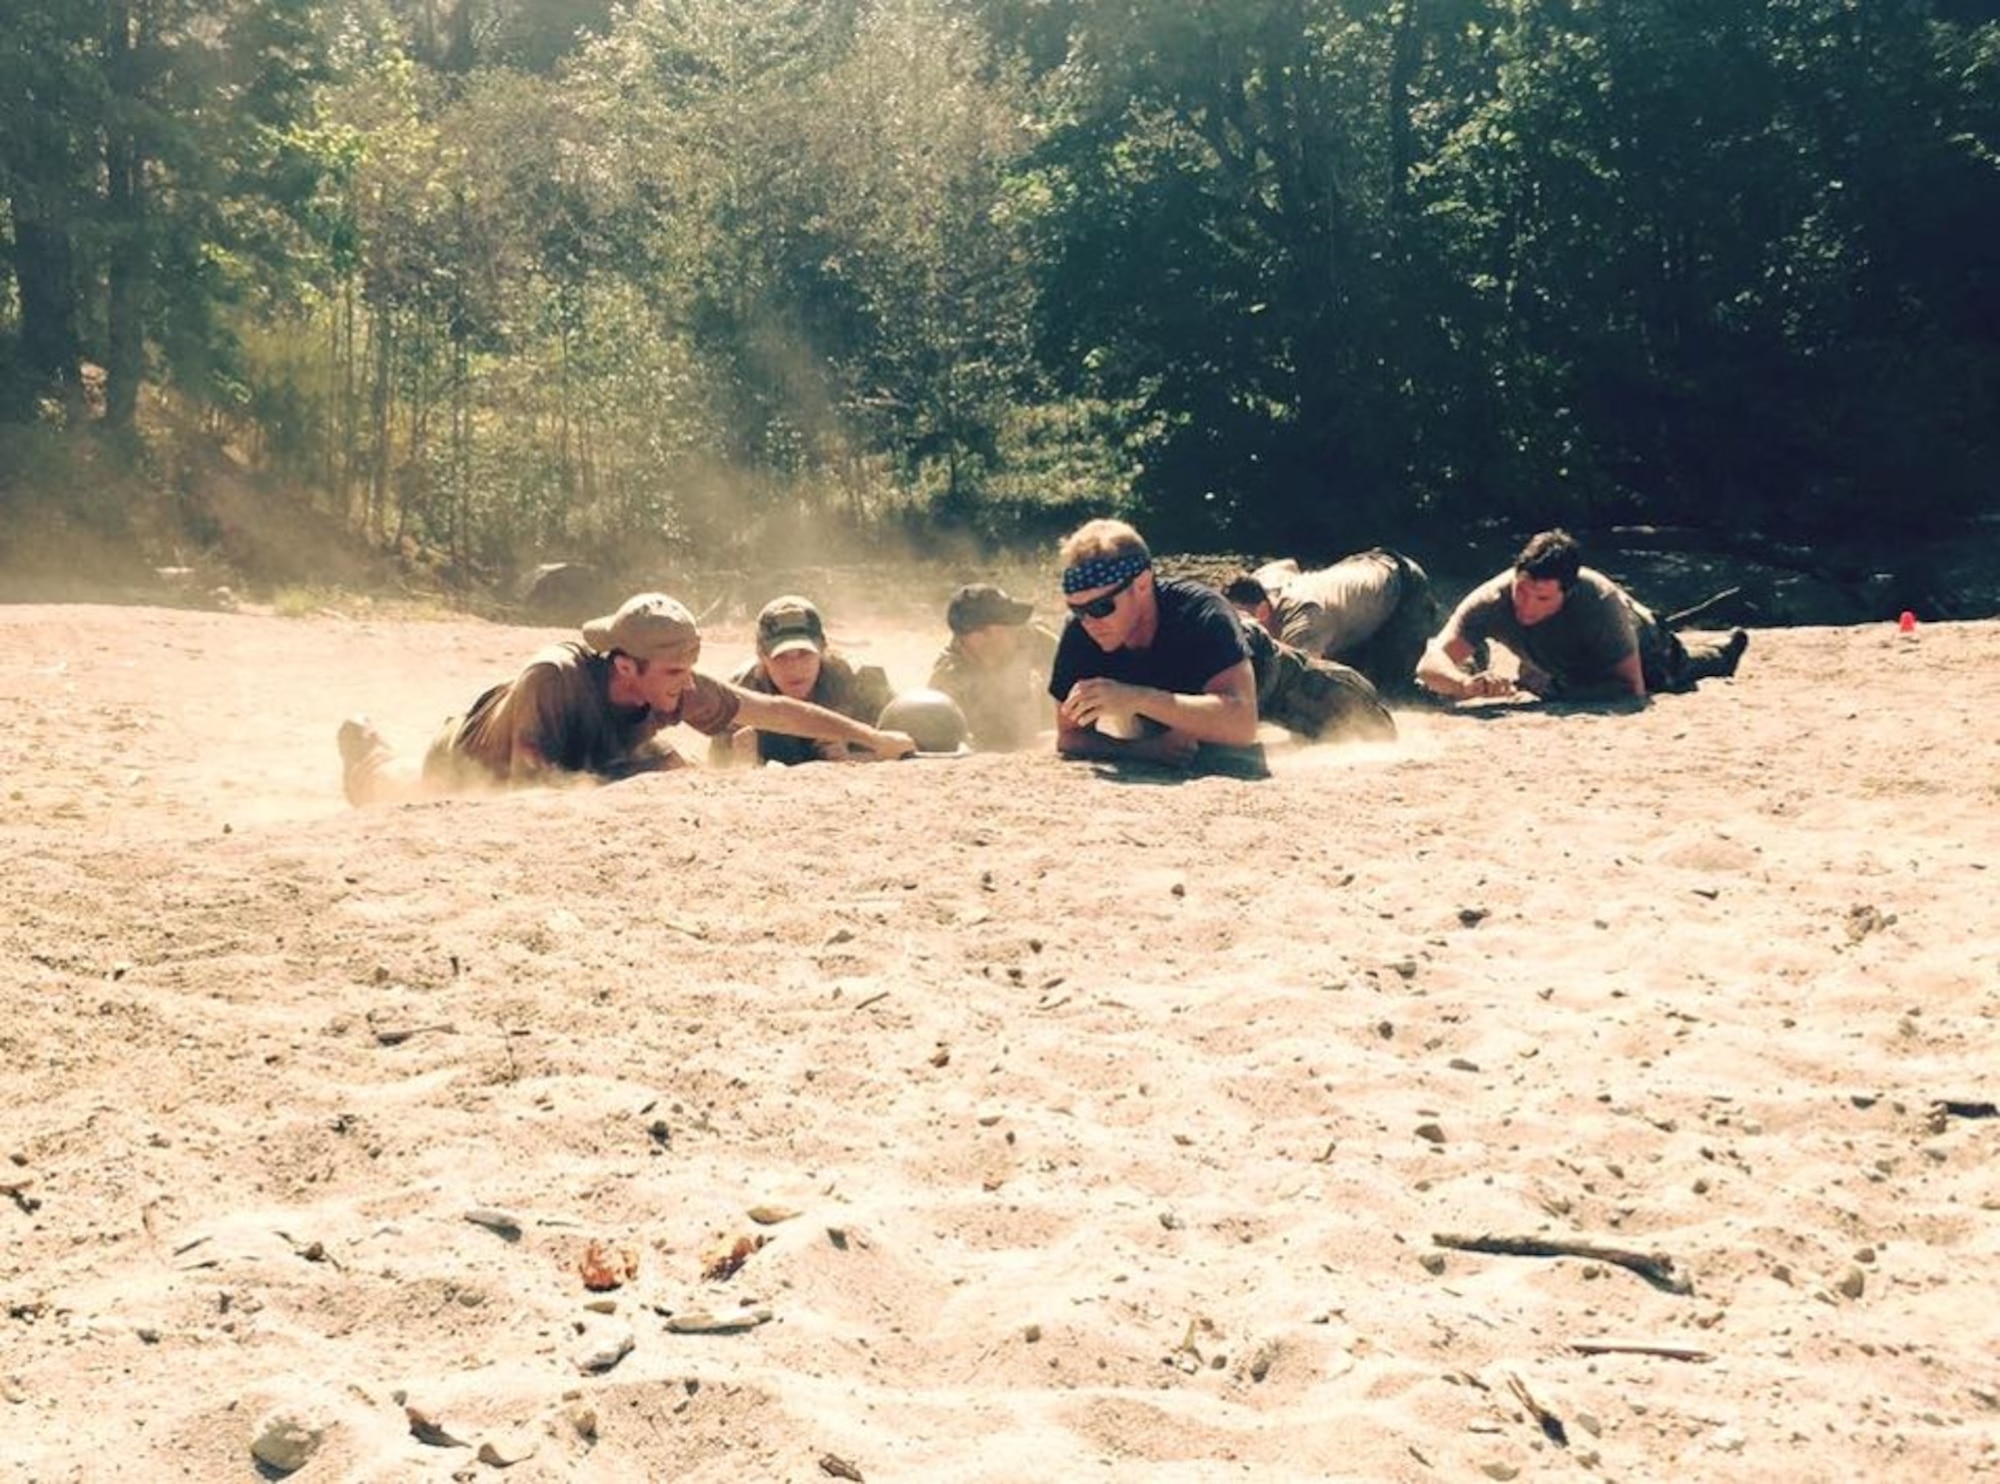 Capt. Kaci Dixon and a group of combat controllers low crawl through sand while moving a 90-pound kettlebell at Yale Reservoir, Wash., in August 2015. They were participating in a 125th Special Tactics Squadron training exercise. (Courtesy photo)